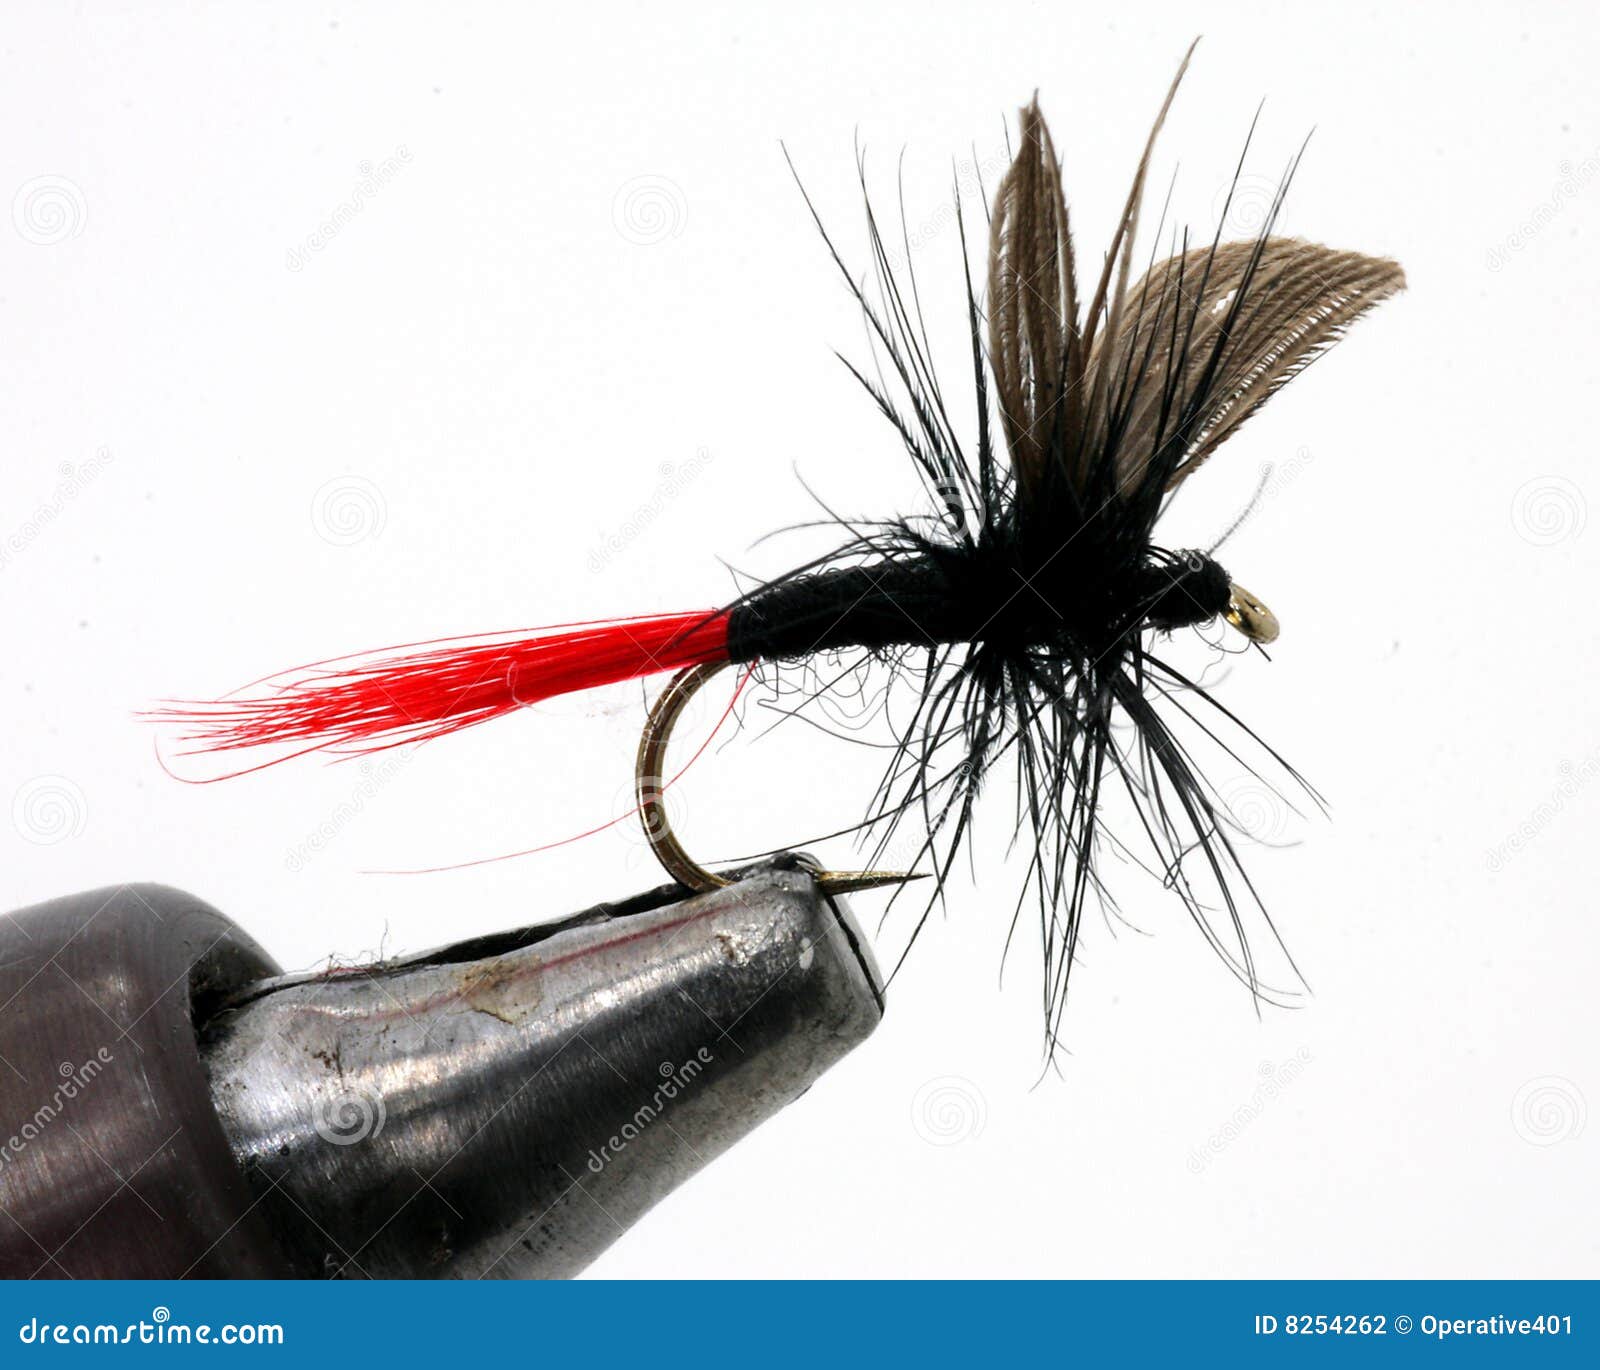 Fishing fly in holder stock photo. Image of fishing, hobbies - 8254262